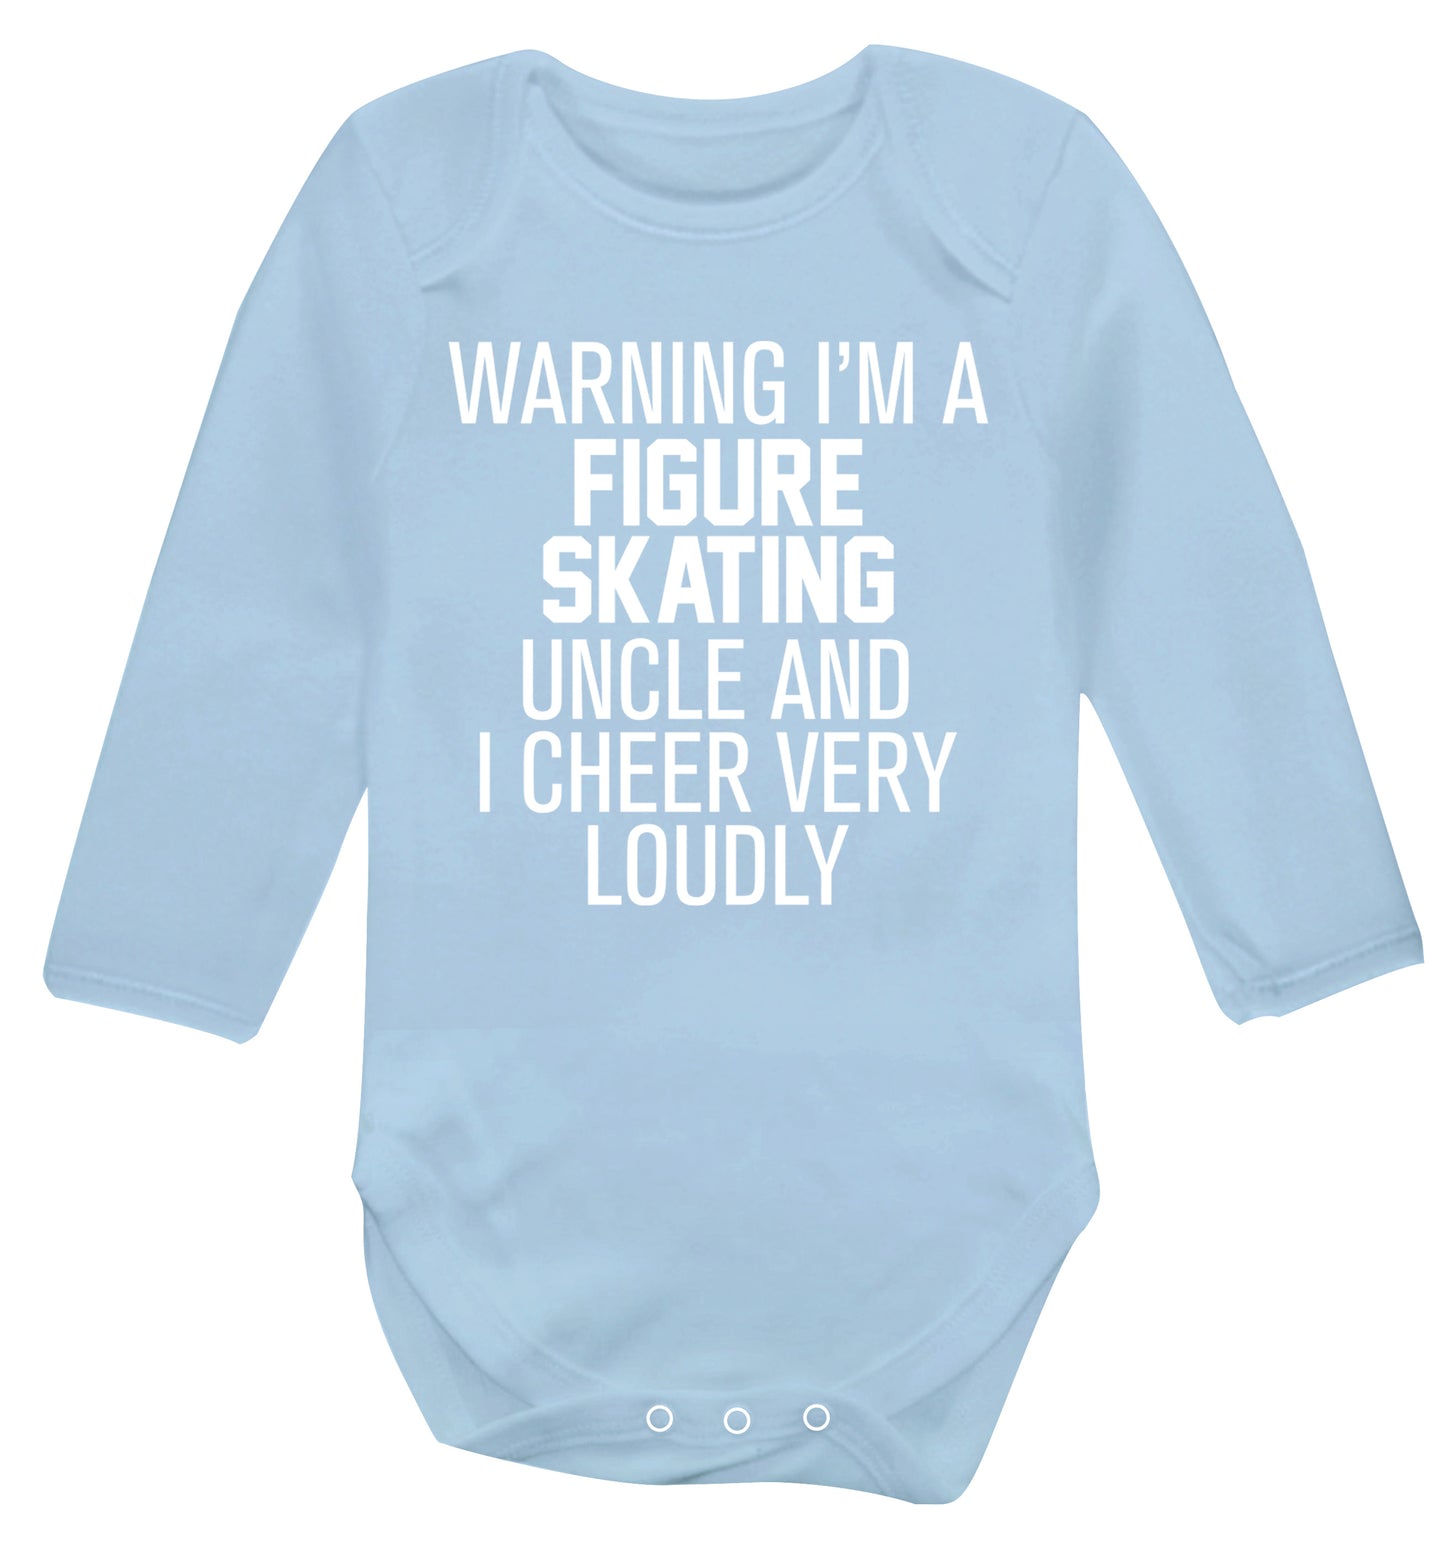 Warning I'm a figure skating uncle and I cheer very loudly Baby Vest long sleeved pale blue 6-12 months